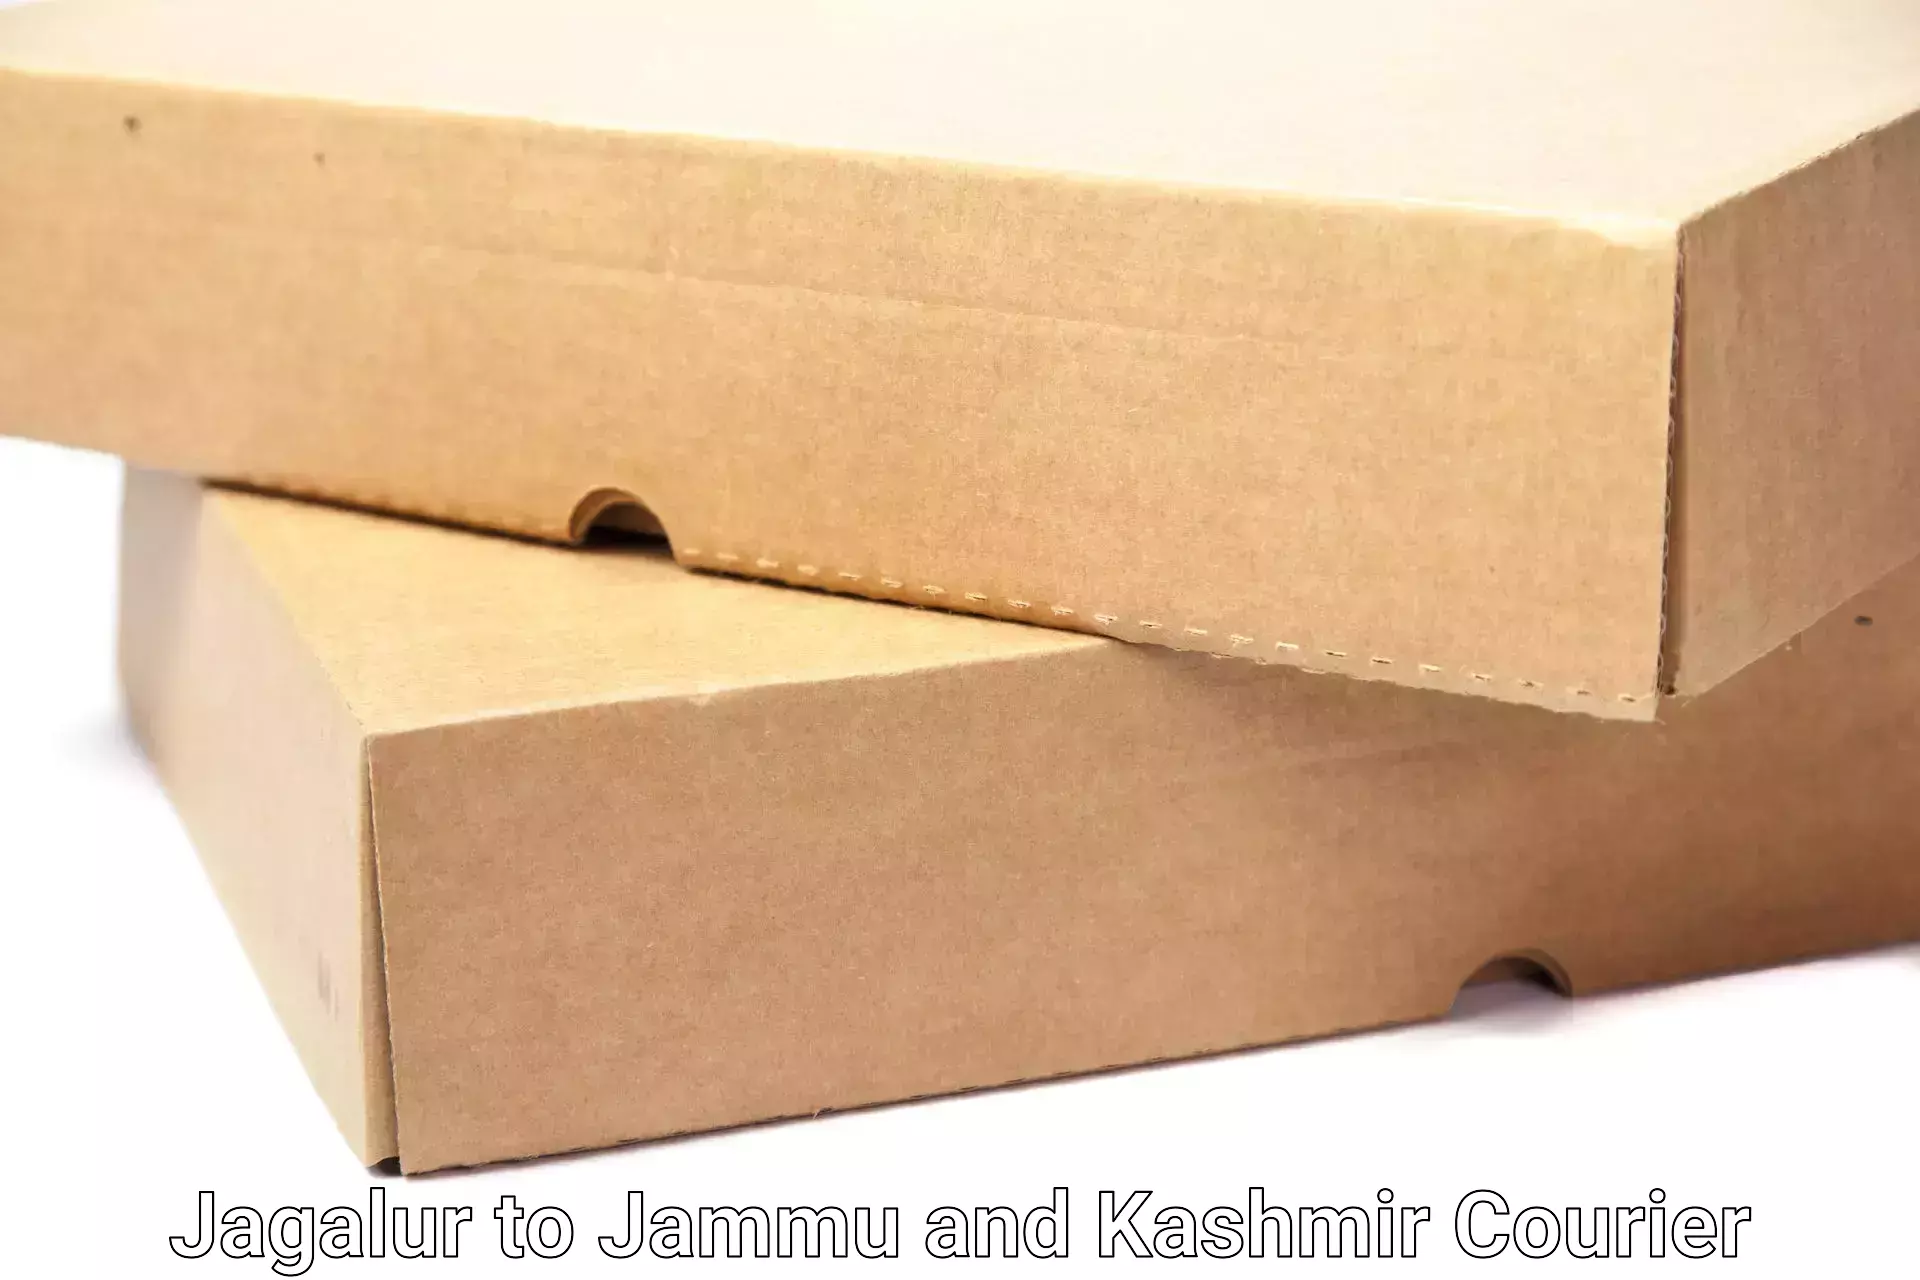 Professional packing services Jagalur to Jammu and Kashmir